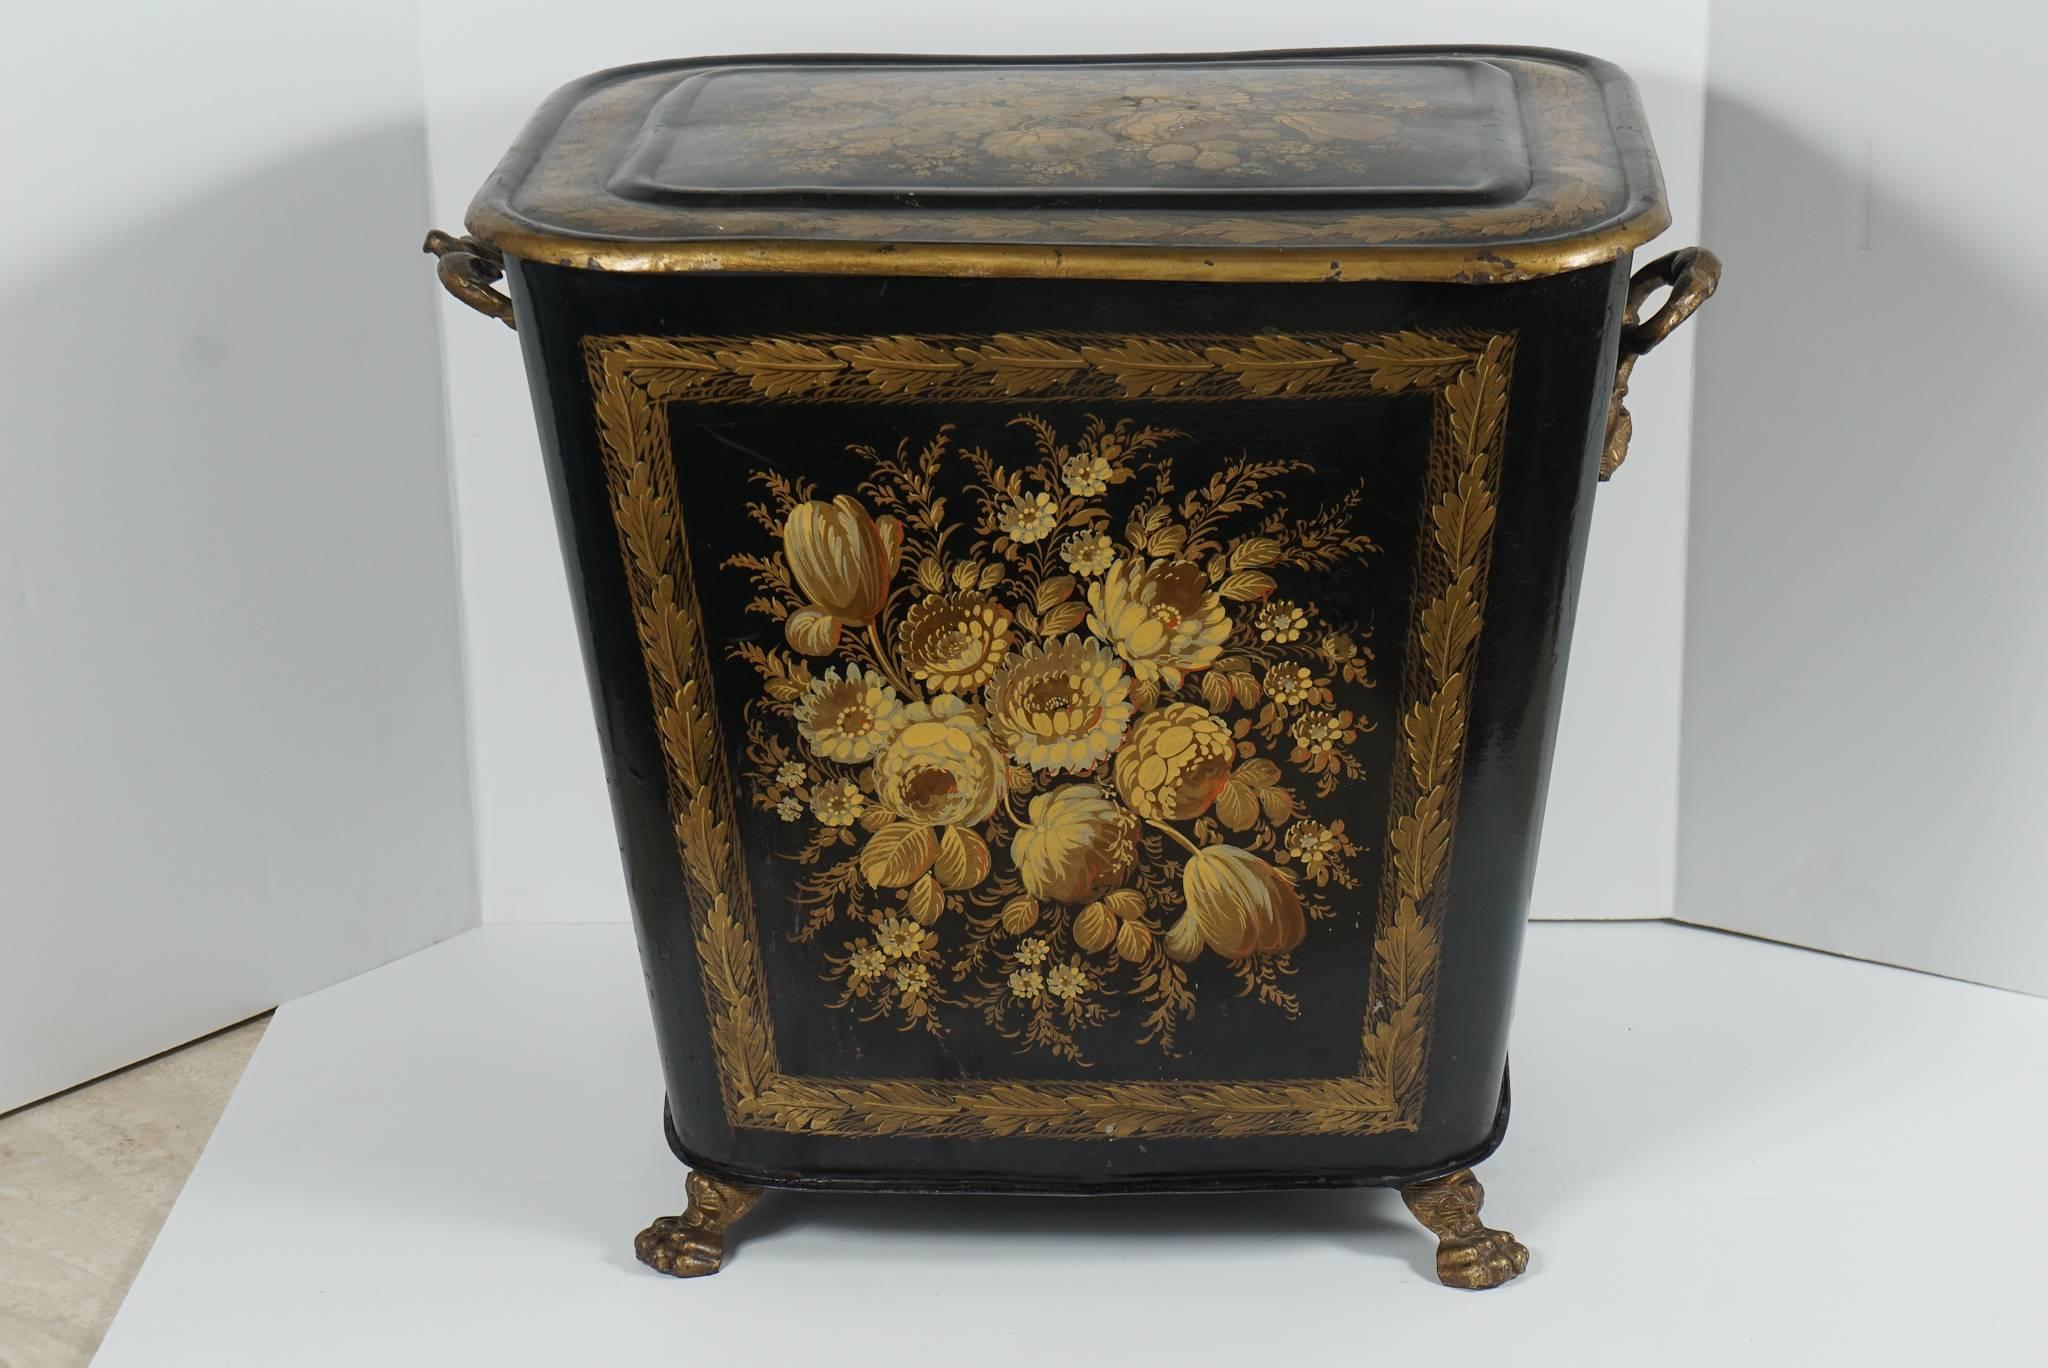 This tole pettie hamper made, circa 1850 in England shows a lovely design enlivened with fine paint details of floral sprays set within acanthus gilded borders on the top and front and back sides. Set in the upper area on the sides are two caring